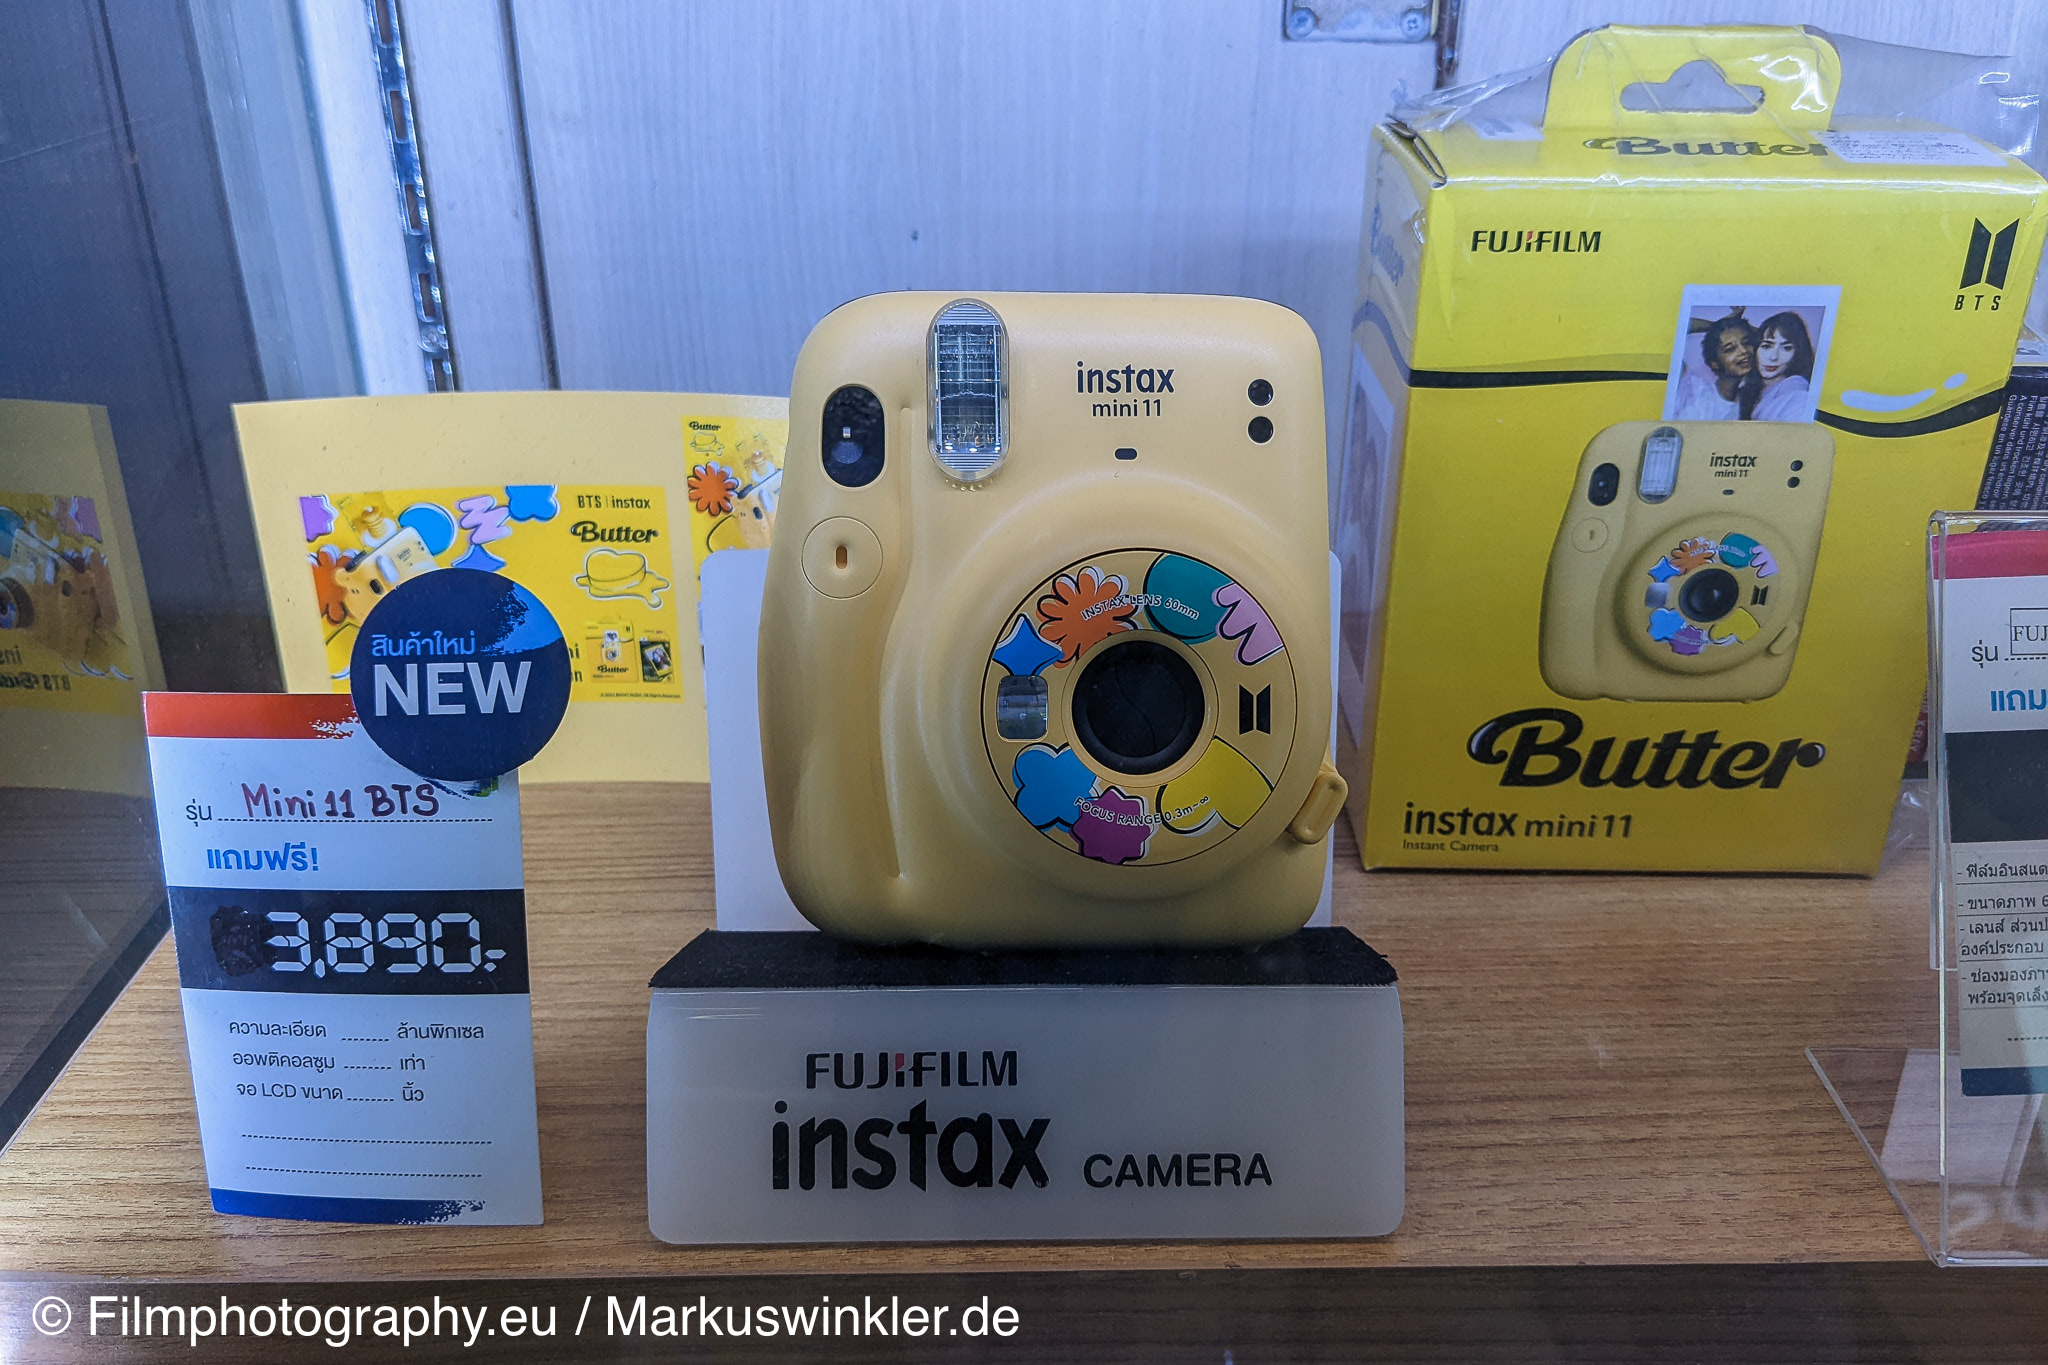 BTS Butter Instax mini 11: Here's why you'd still want one, in this day and  age - SoyaCincau, instax mini 11 